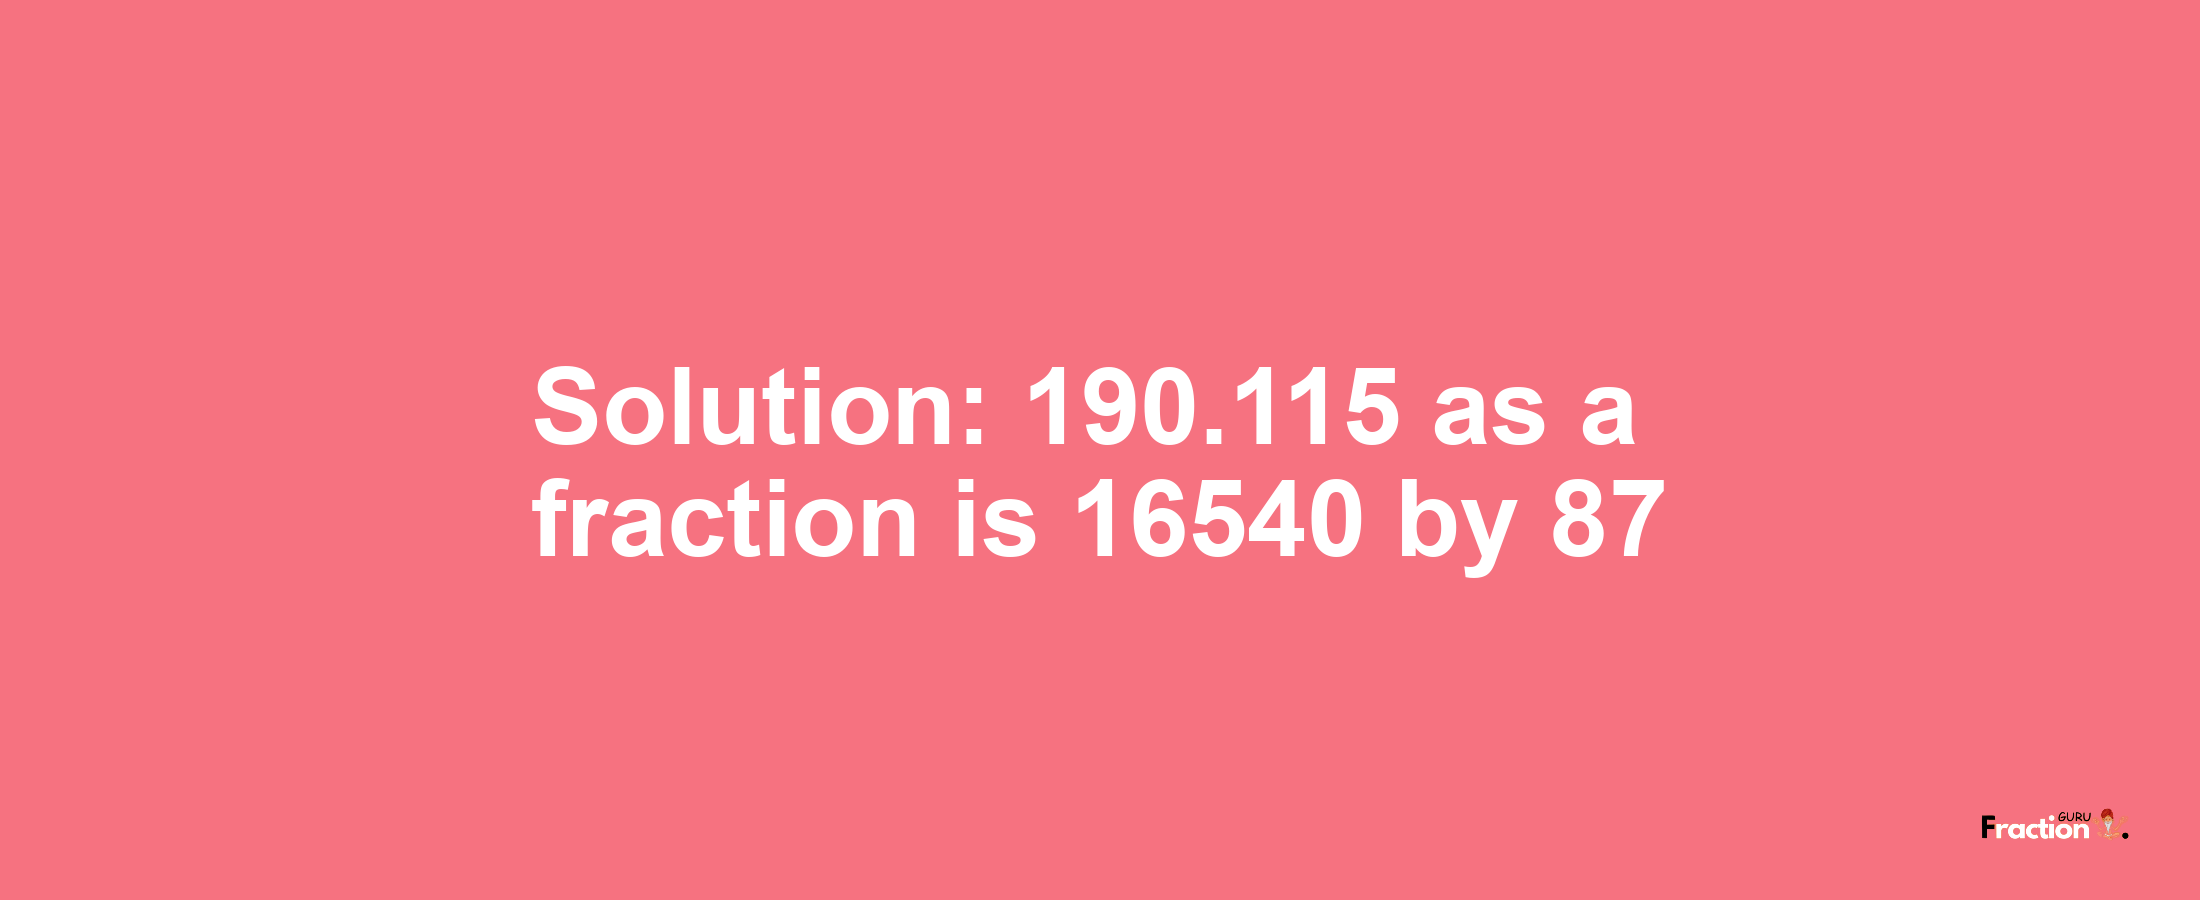 Solution:190.115 as a fraction is 16540/87